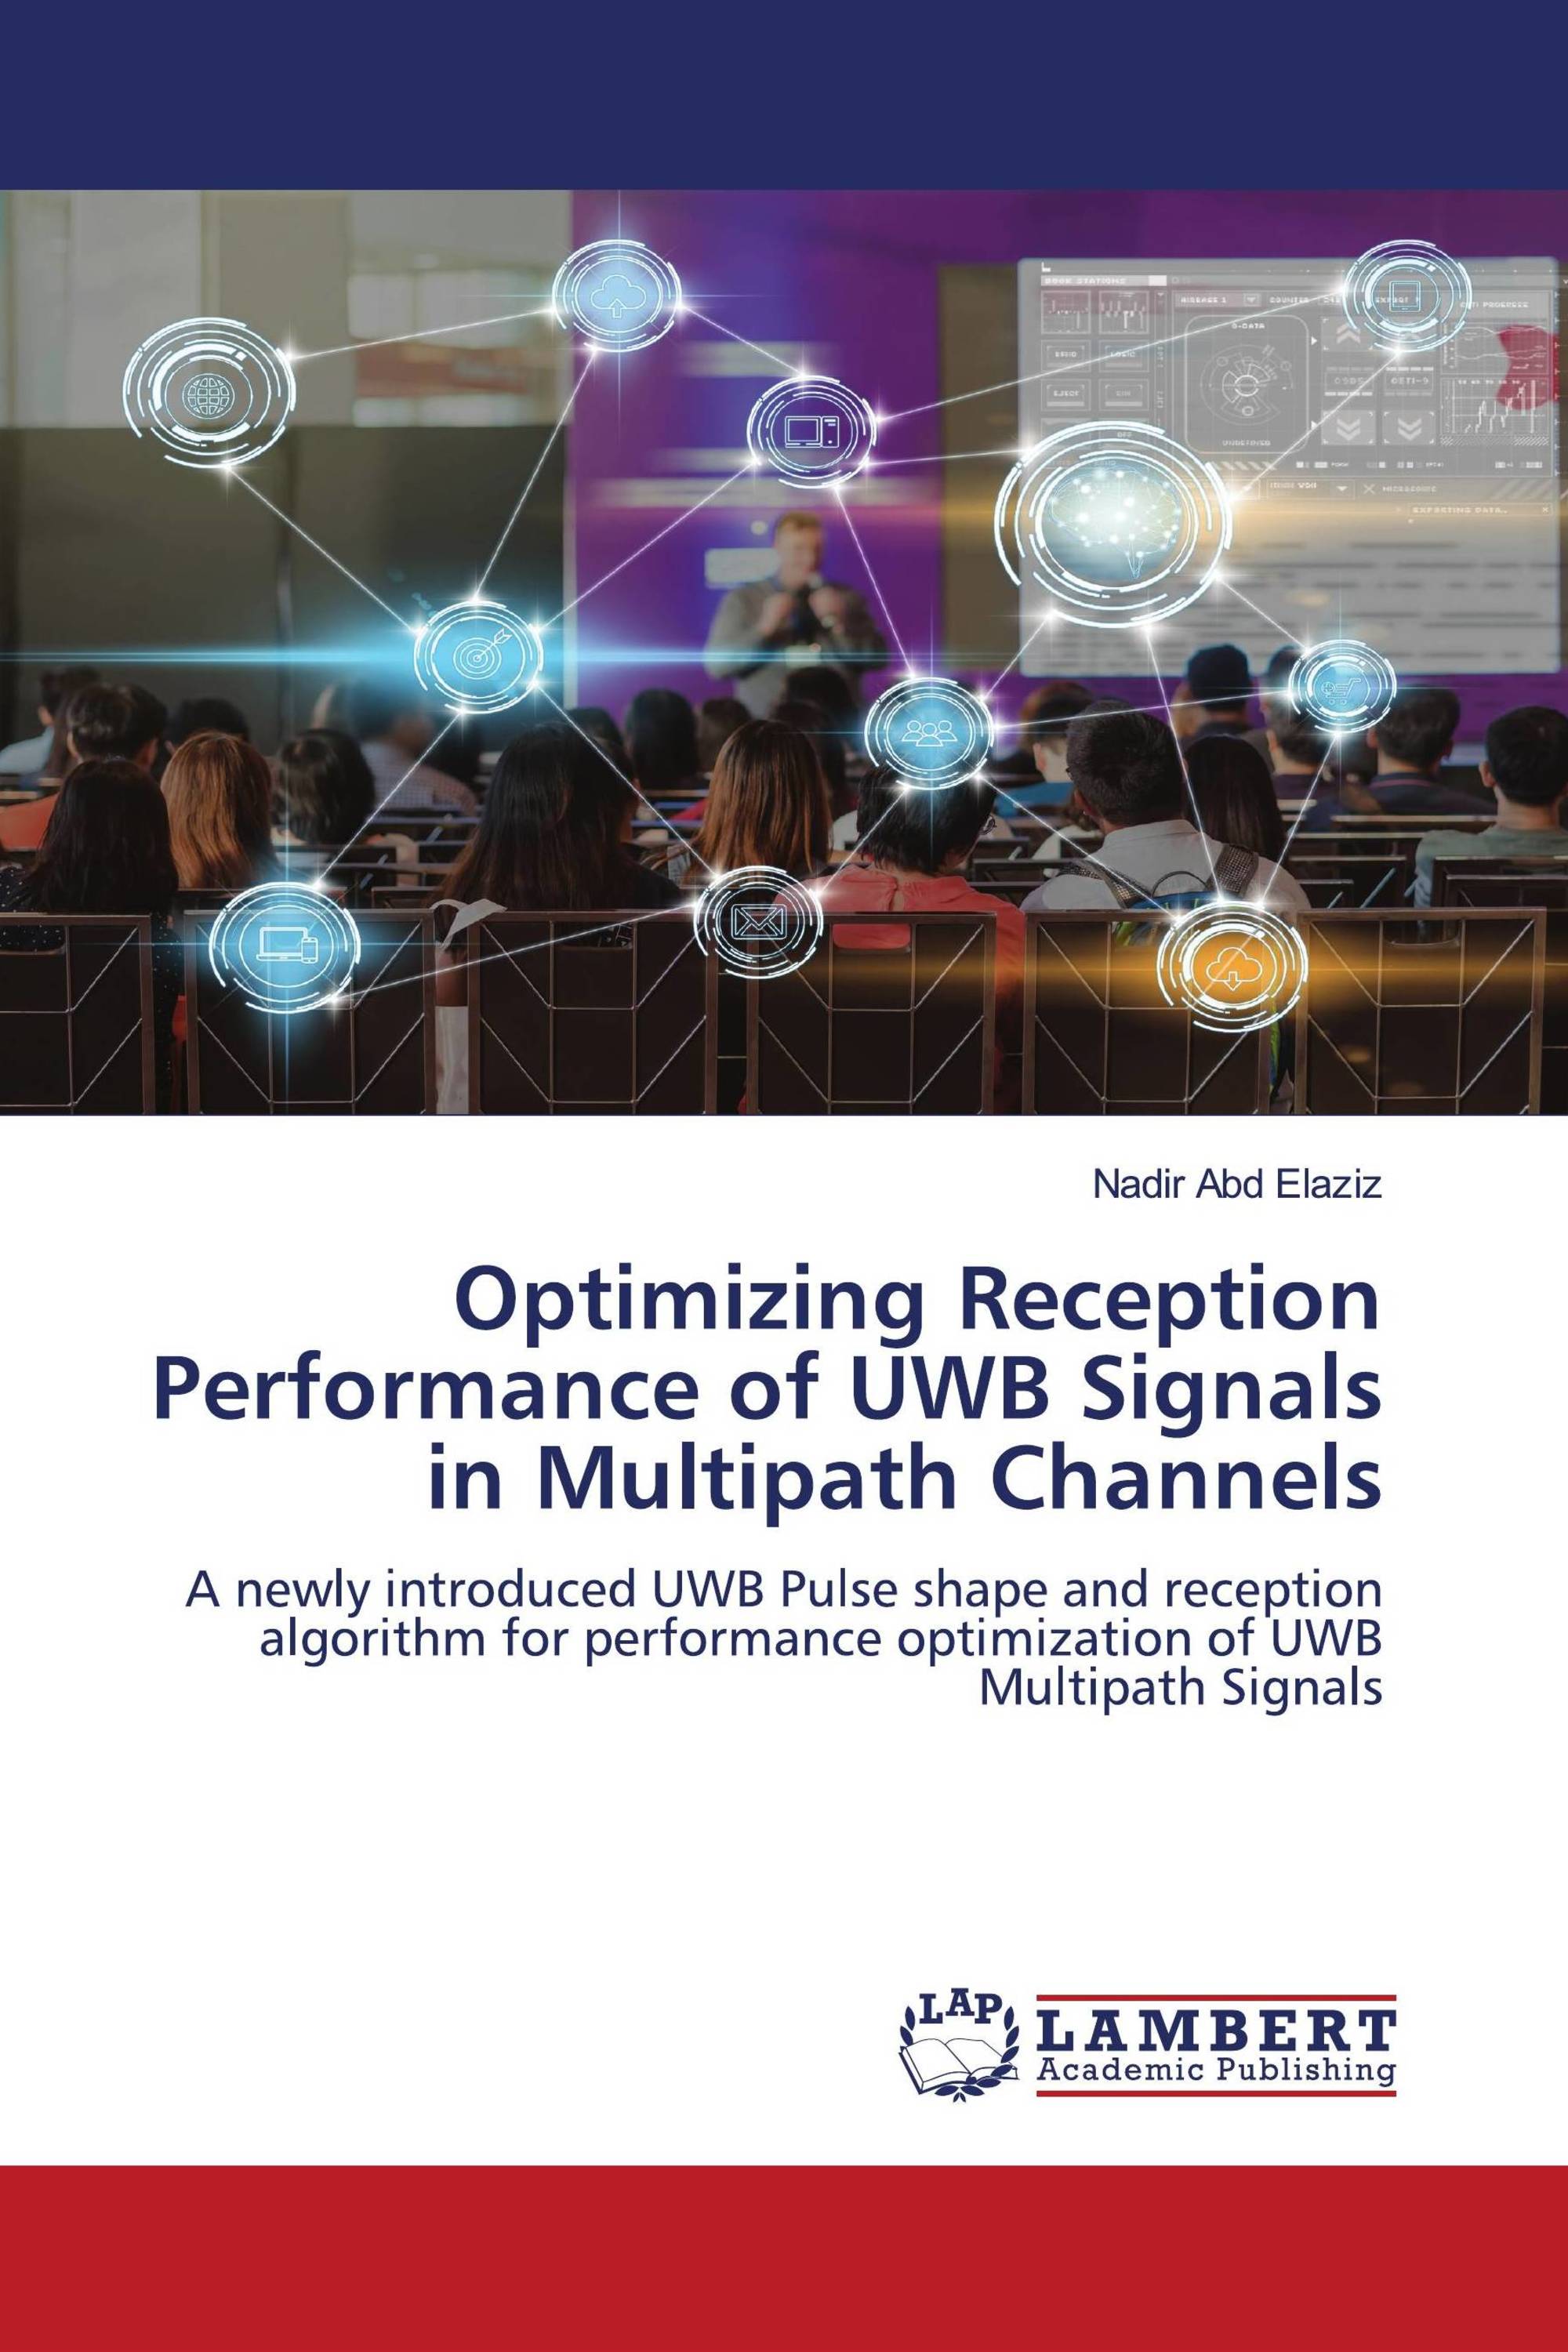 Optimizing Reception Performance of UWB Signals in Multipath Channels